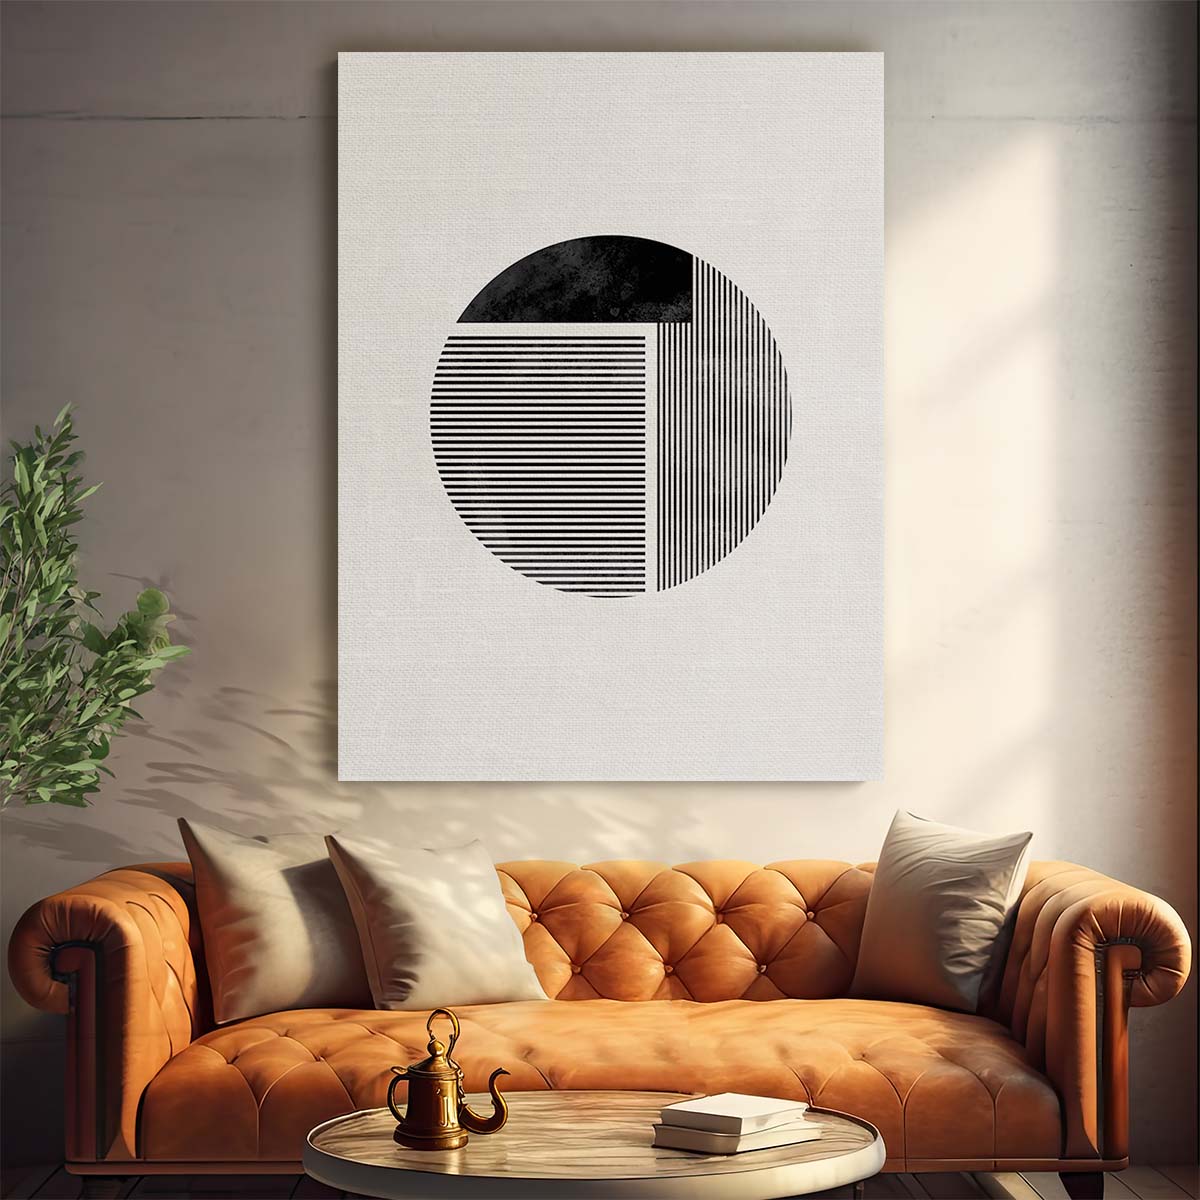 Abstract Geometric Circle Line Art Illustration in Minimalist Style by Luxuriance Designs, made in USA